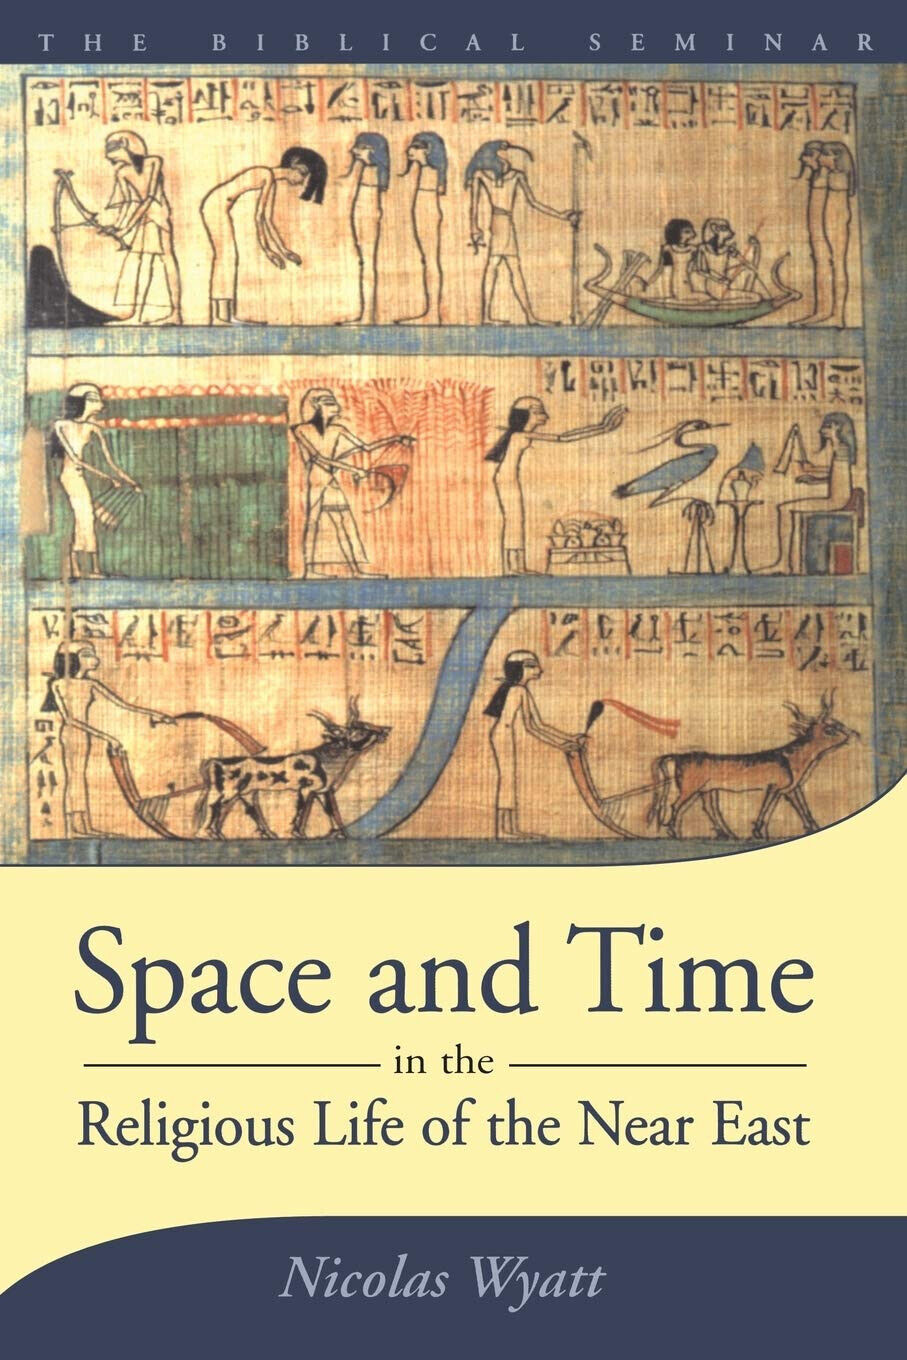 Space and Time in the Religious Life of the Near East - Nicolas Wyatt - 2001